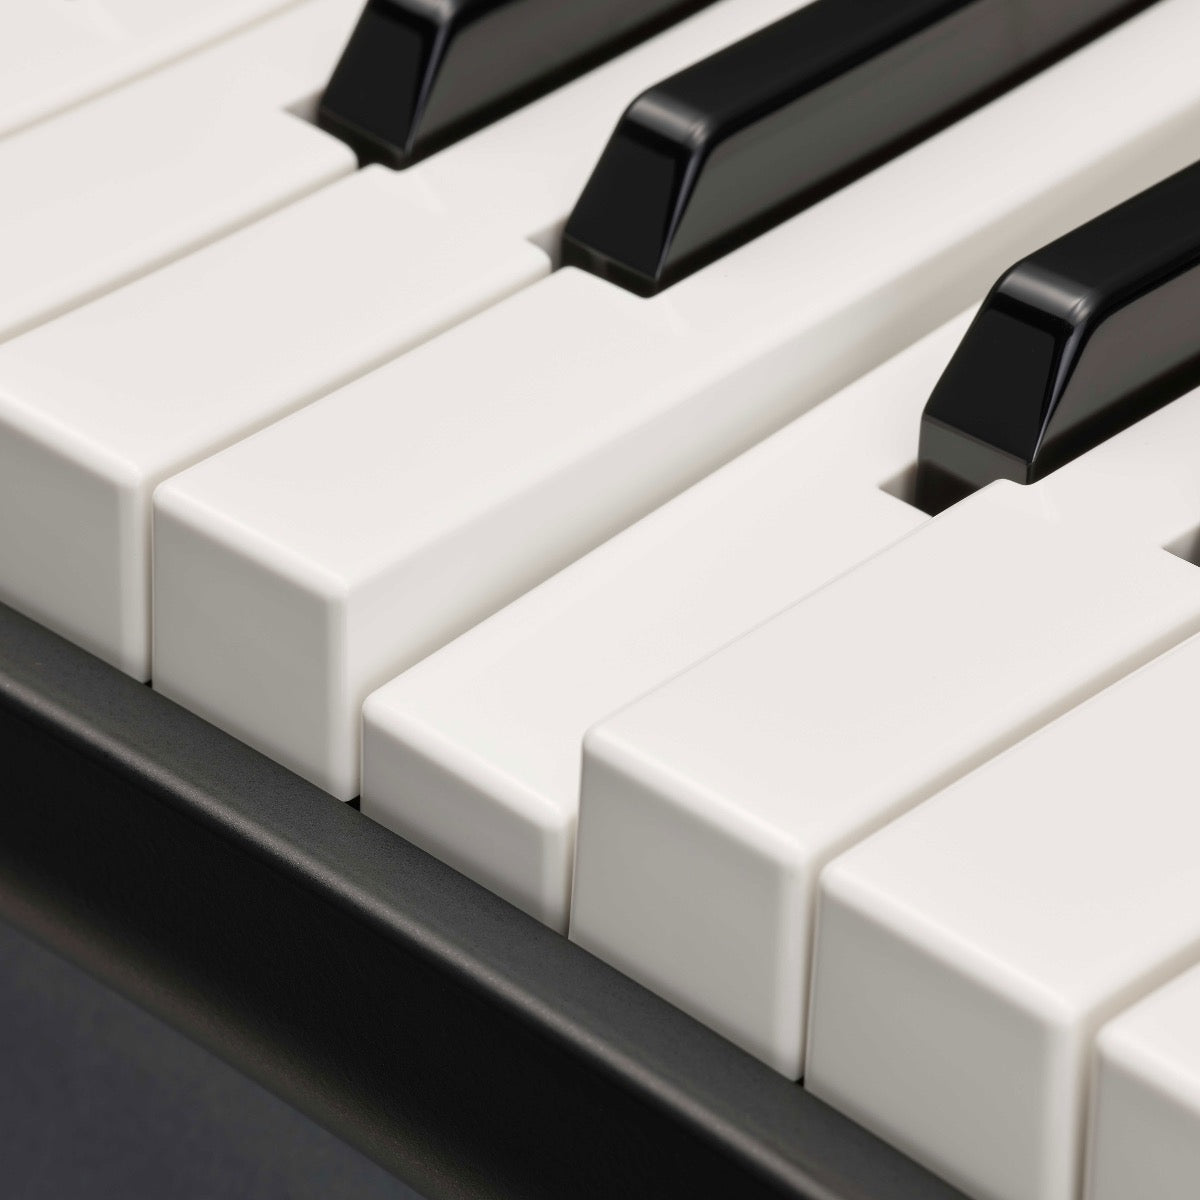 Detail view of Yamaha YC61 61-Key Stage Keyboard and Organ showing portion of keybed with one key depressed